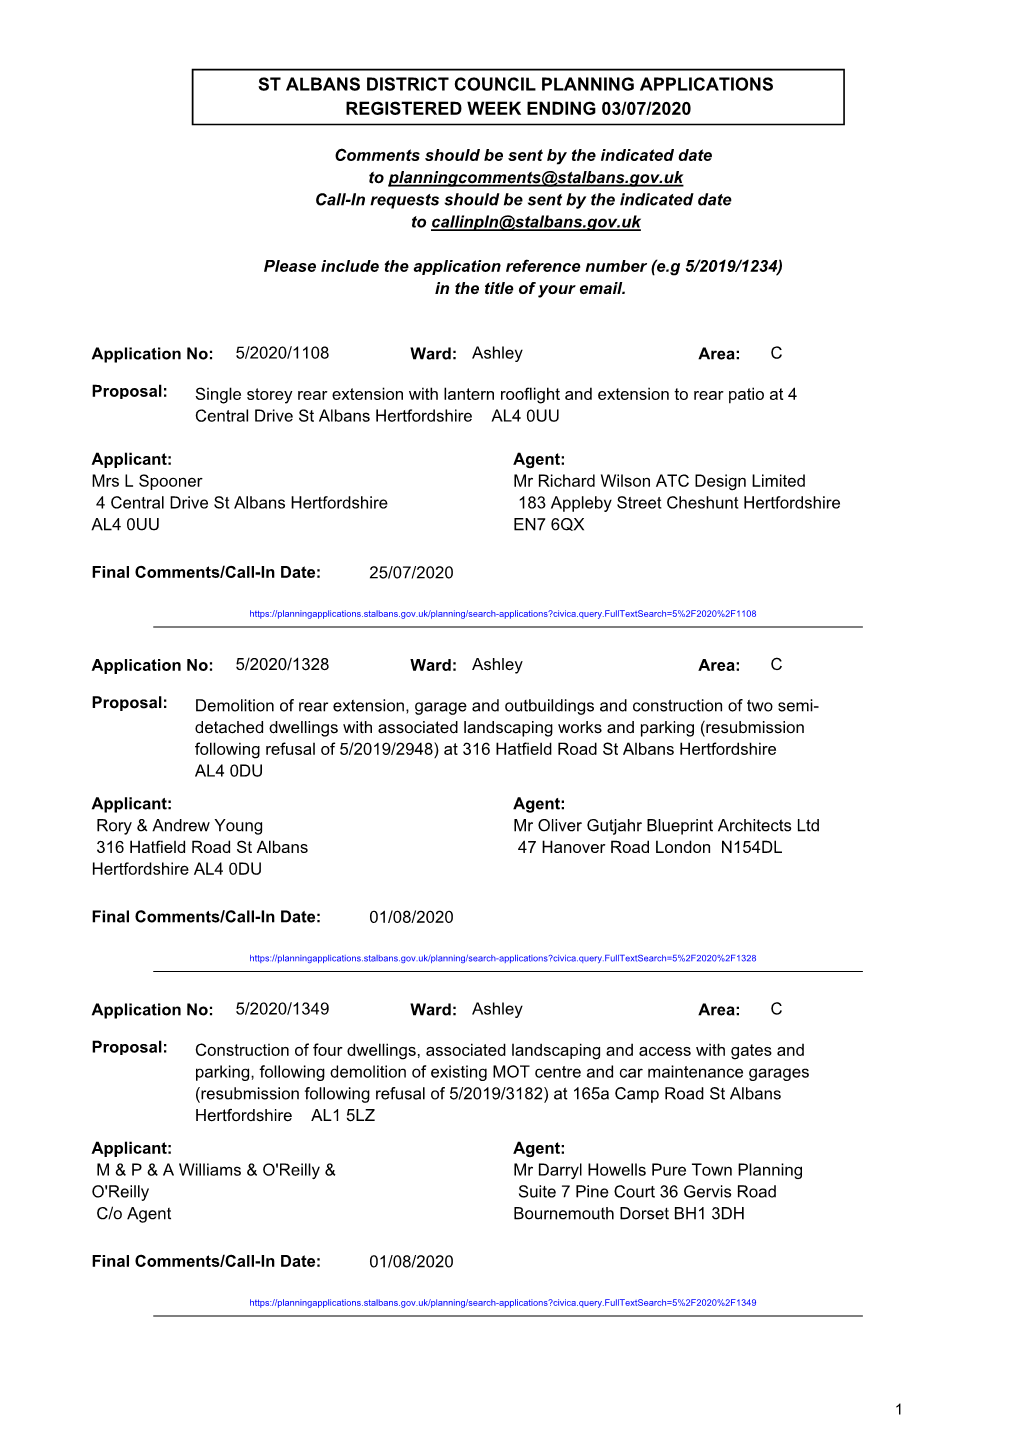 St Albans District Council Planning Applications Registered Week Ending 03/07/2020